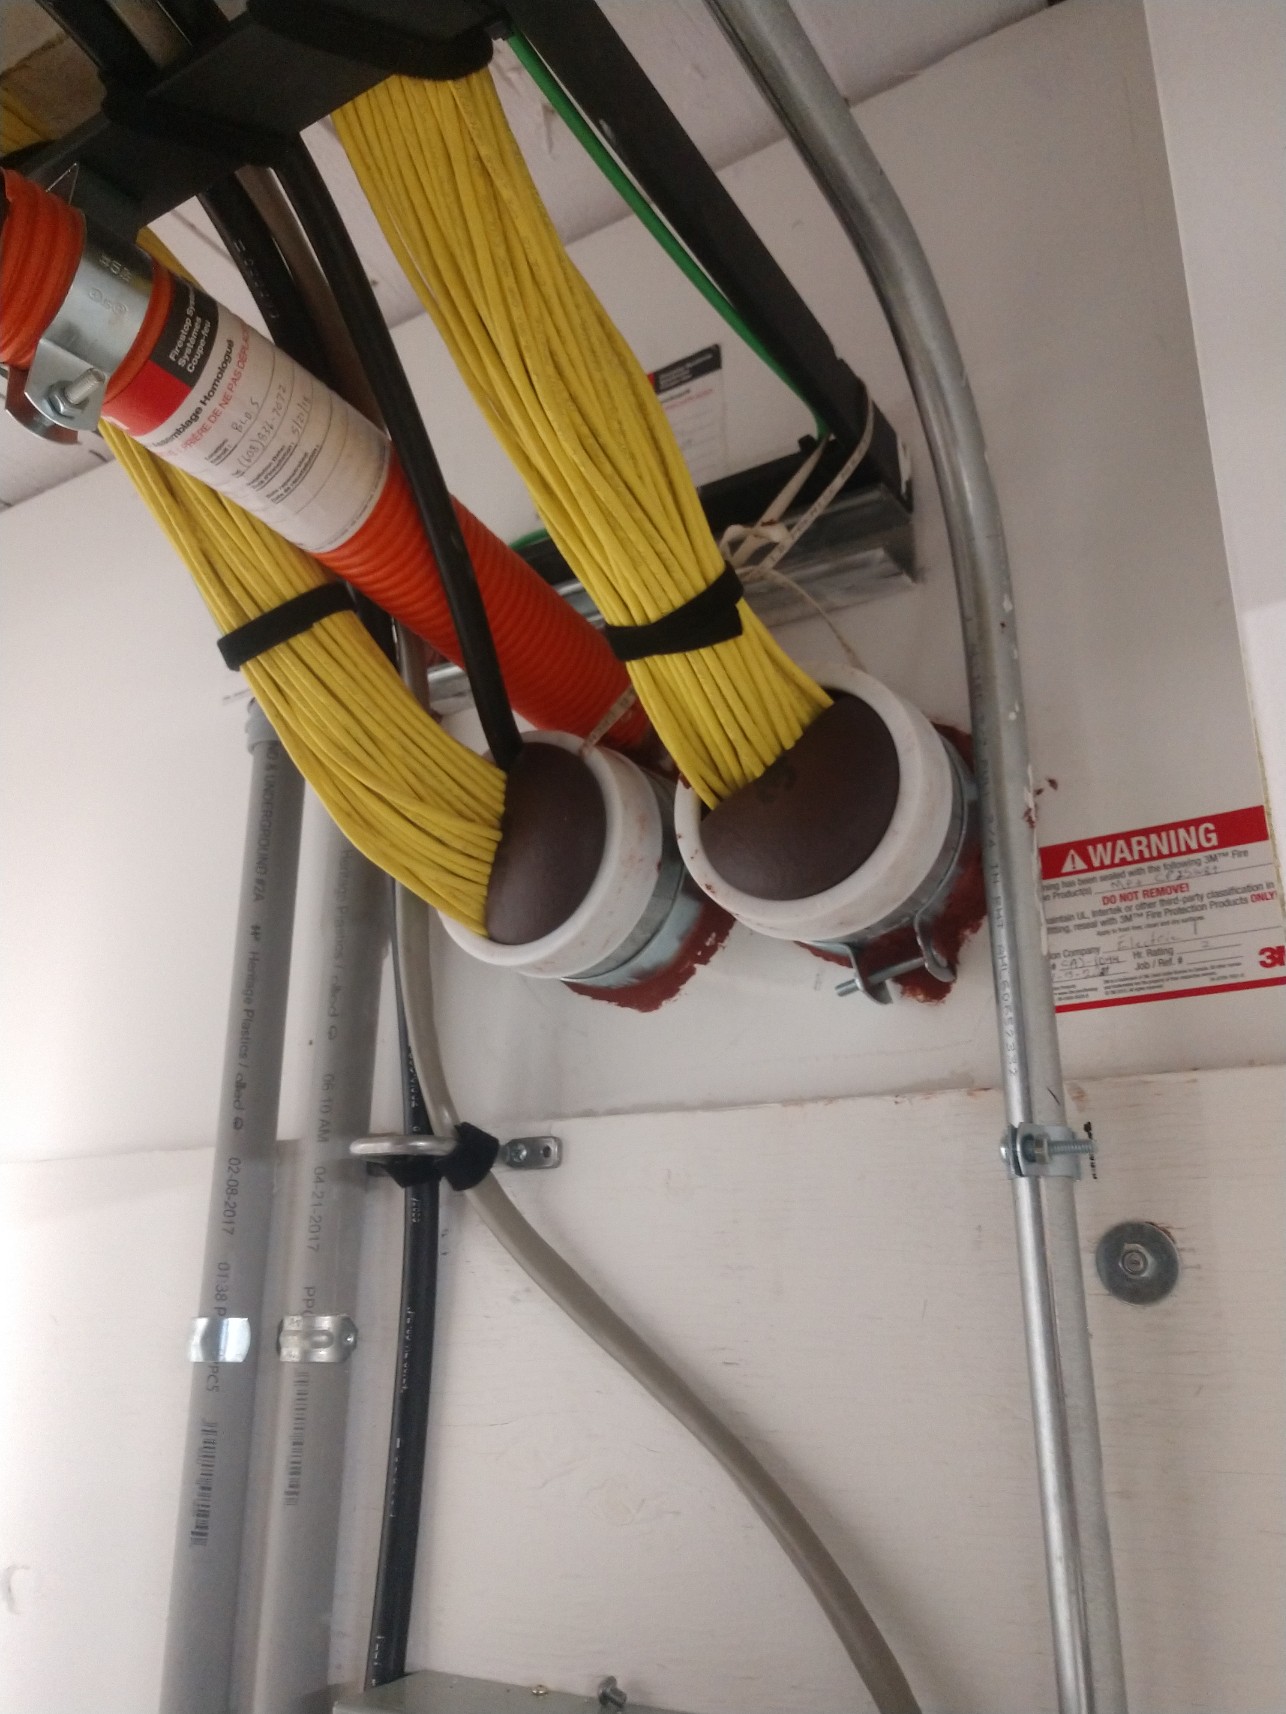 structured cabling system in commercial building